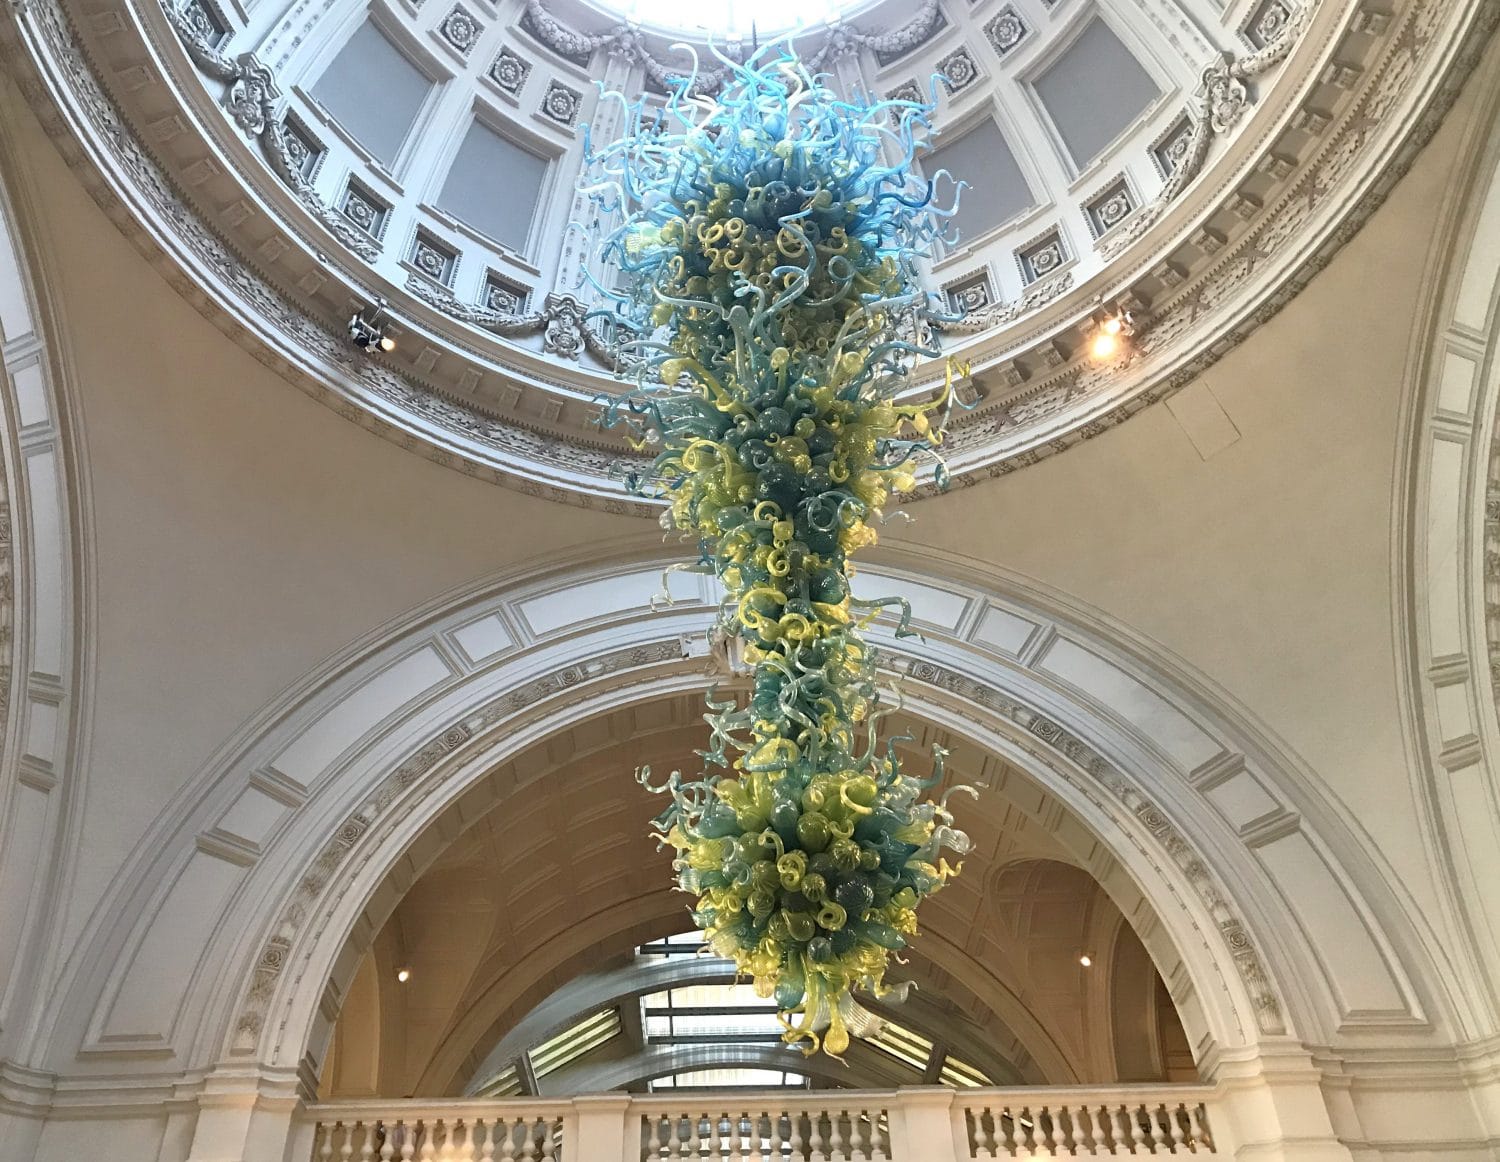 Dale Chihuly's V&A Rotunda Chandelier